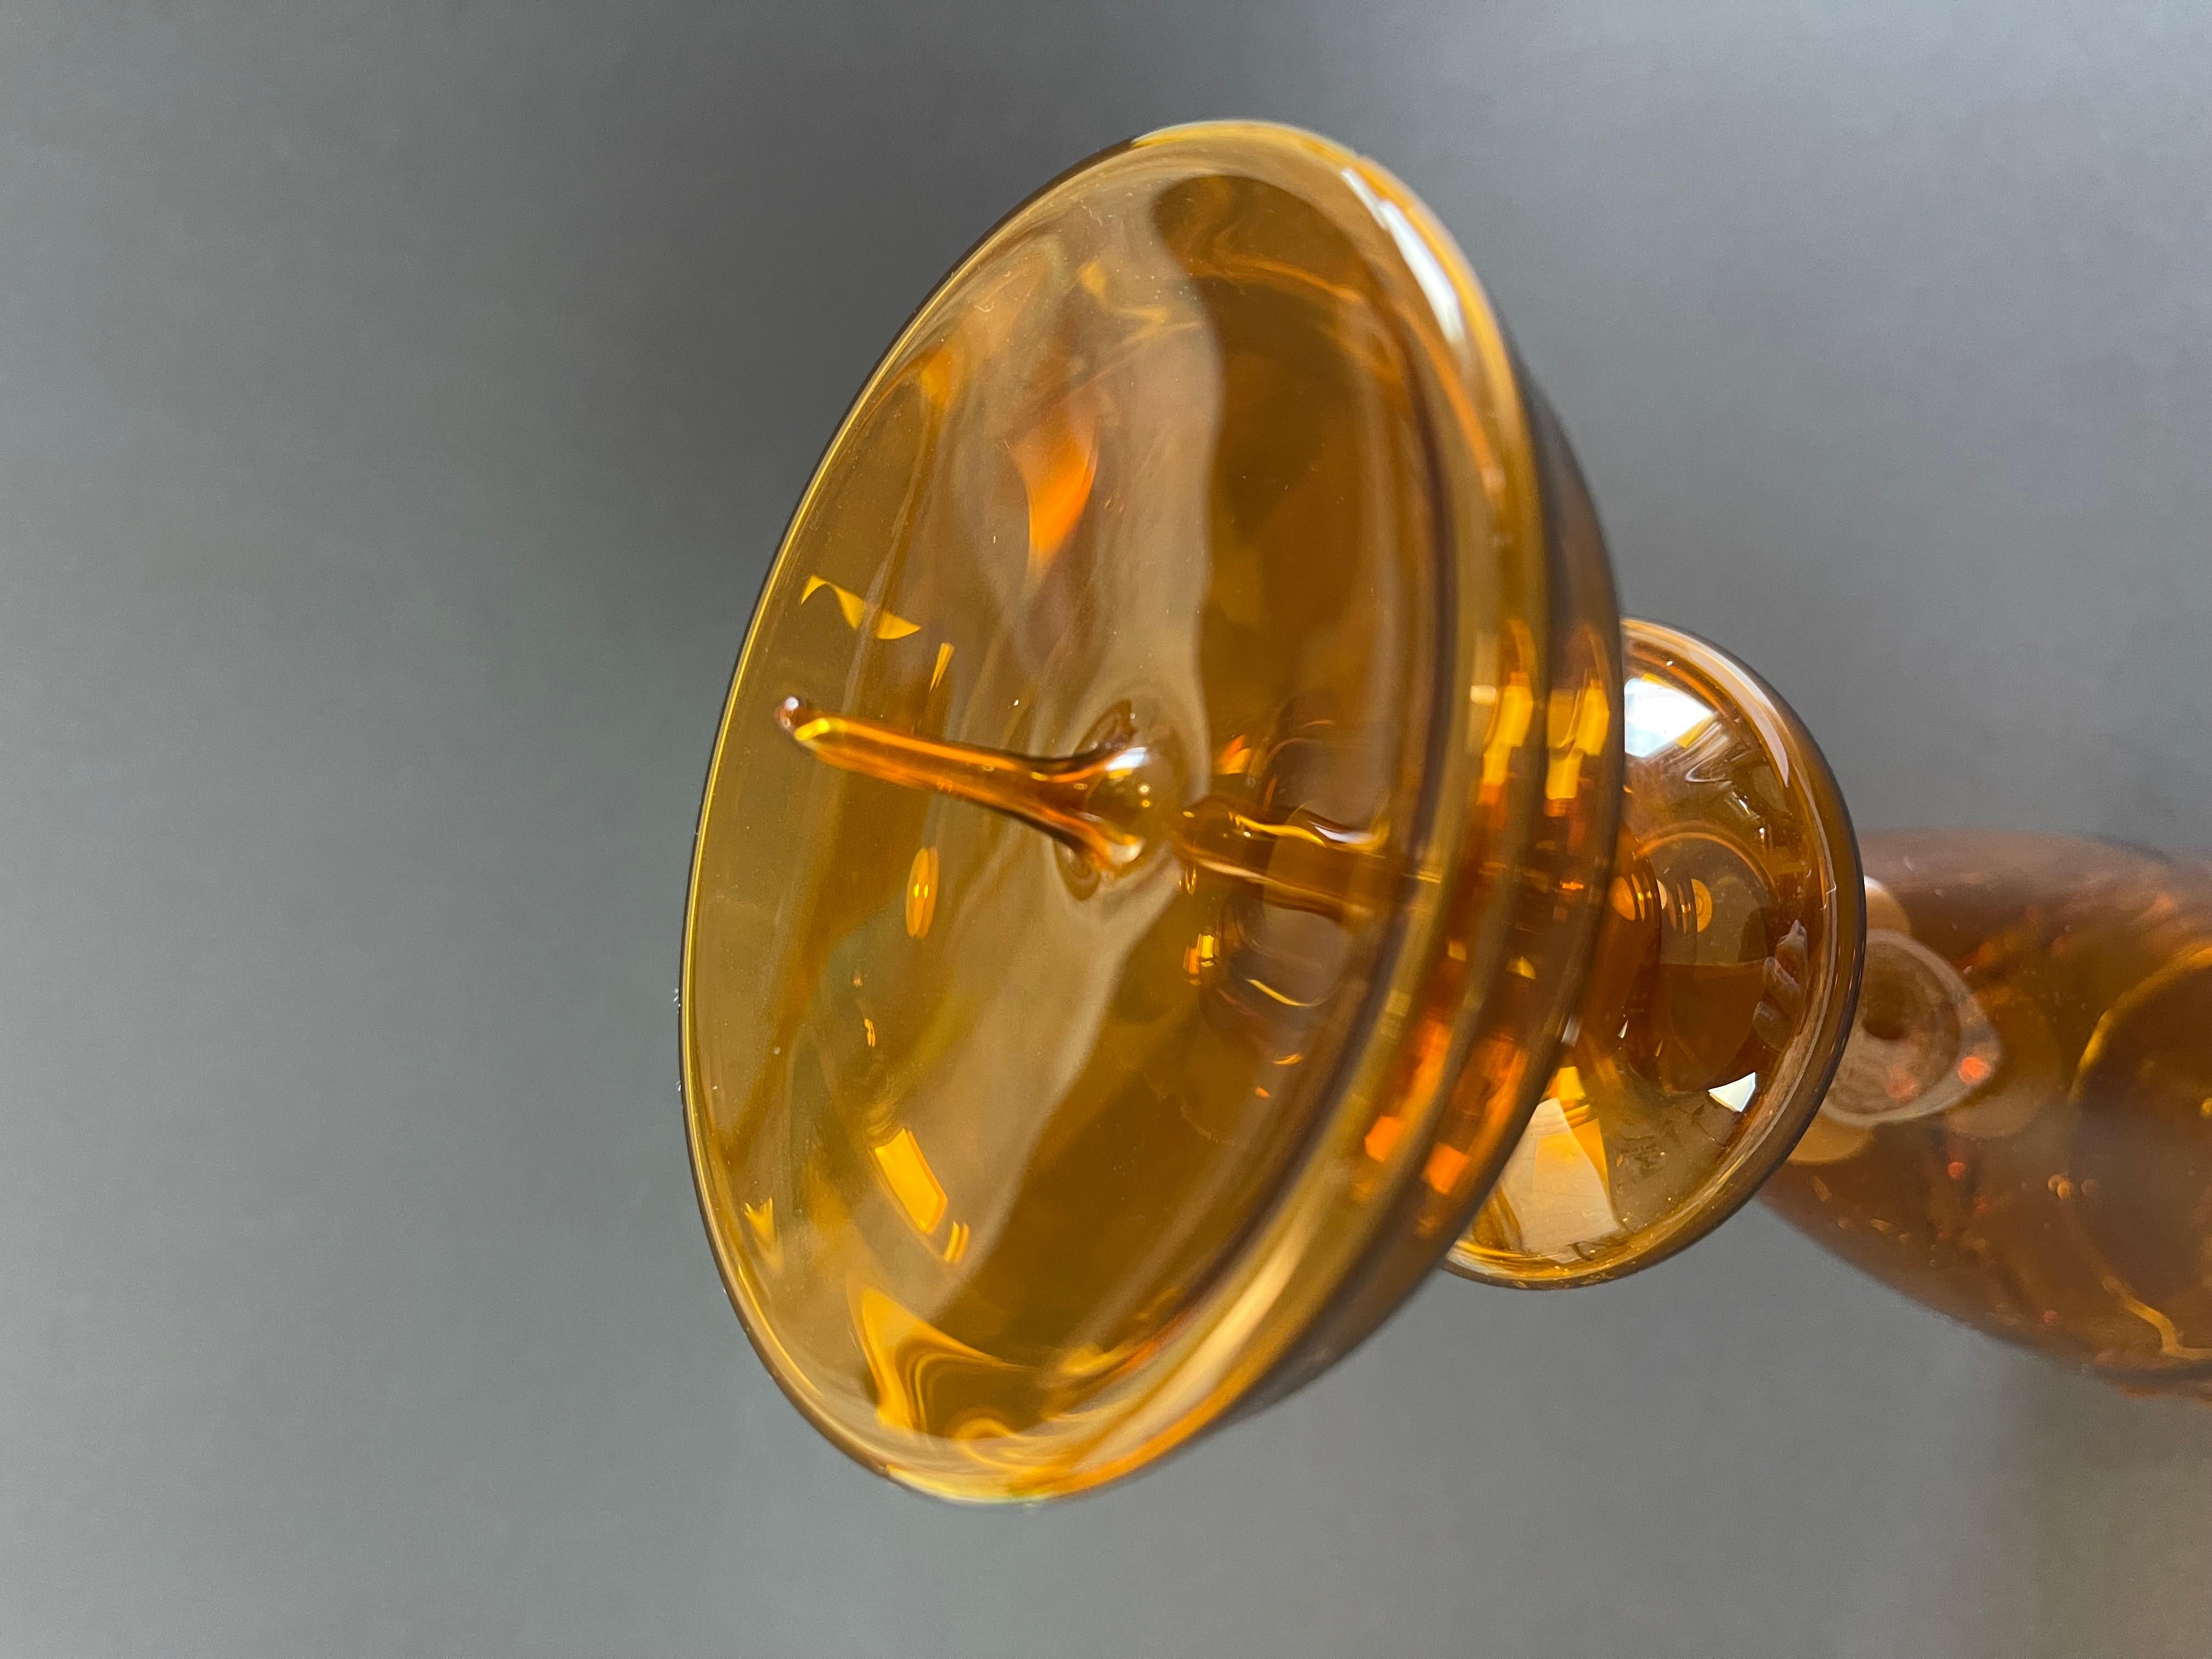 Hand-Crafted Mid-Century Amber Art Glass Candlestick by Albin Schaedel 1960s, Eastern Germany